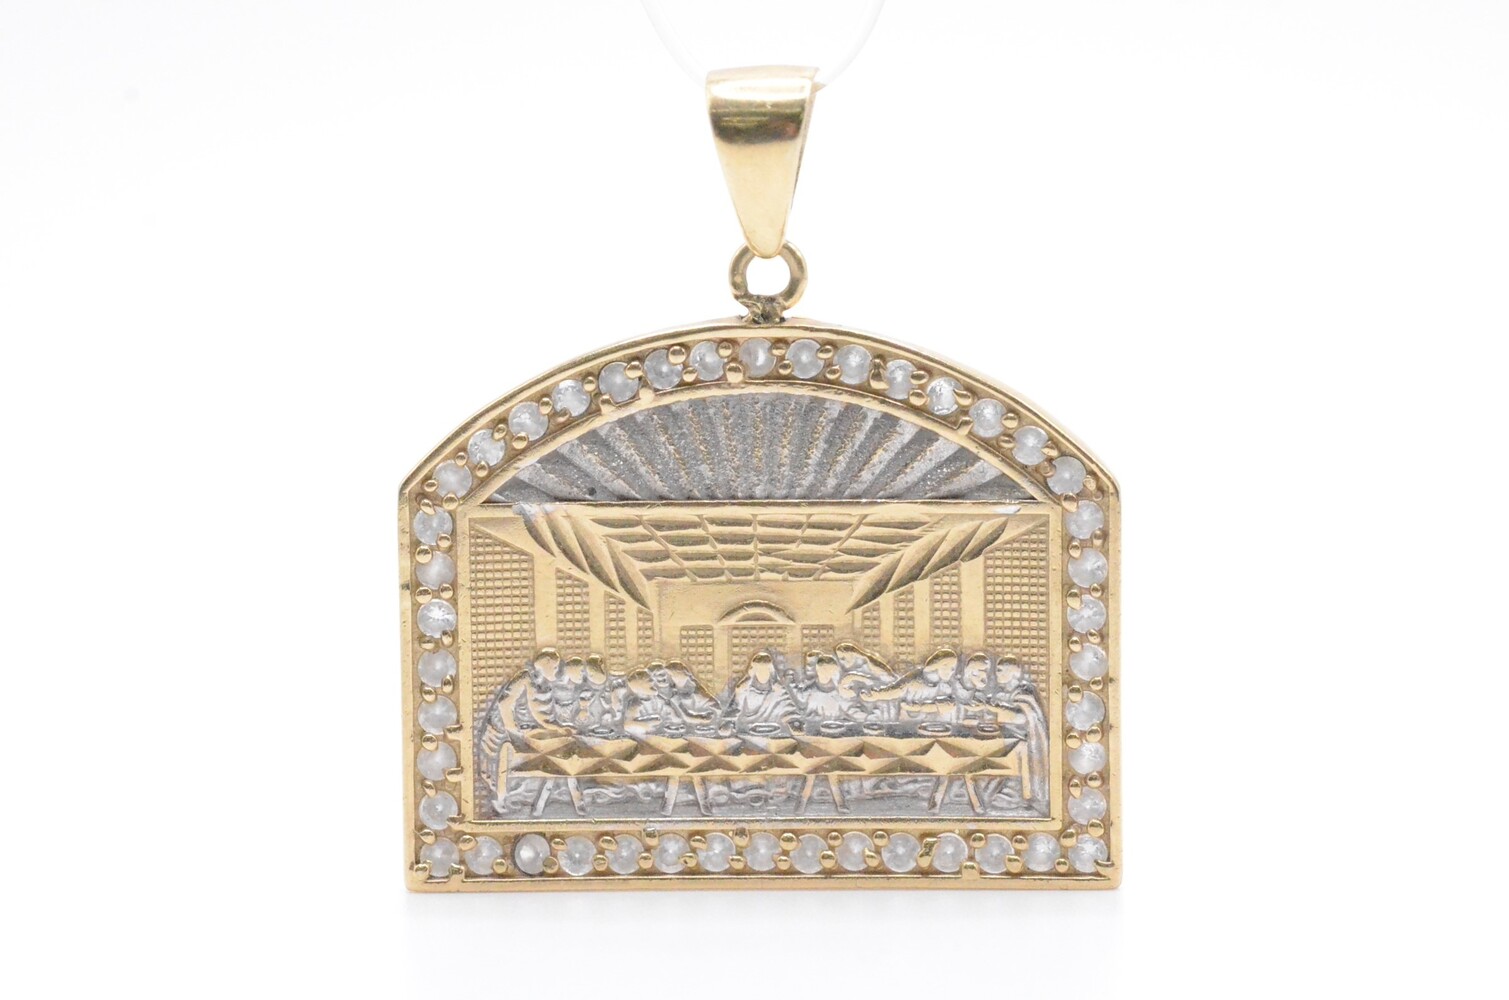  10K Yellow Gold Last Supper Pendant 7.6 Grams, Larger Size!